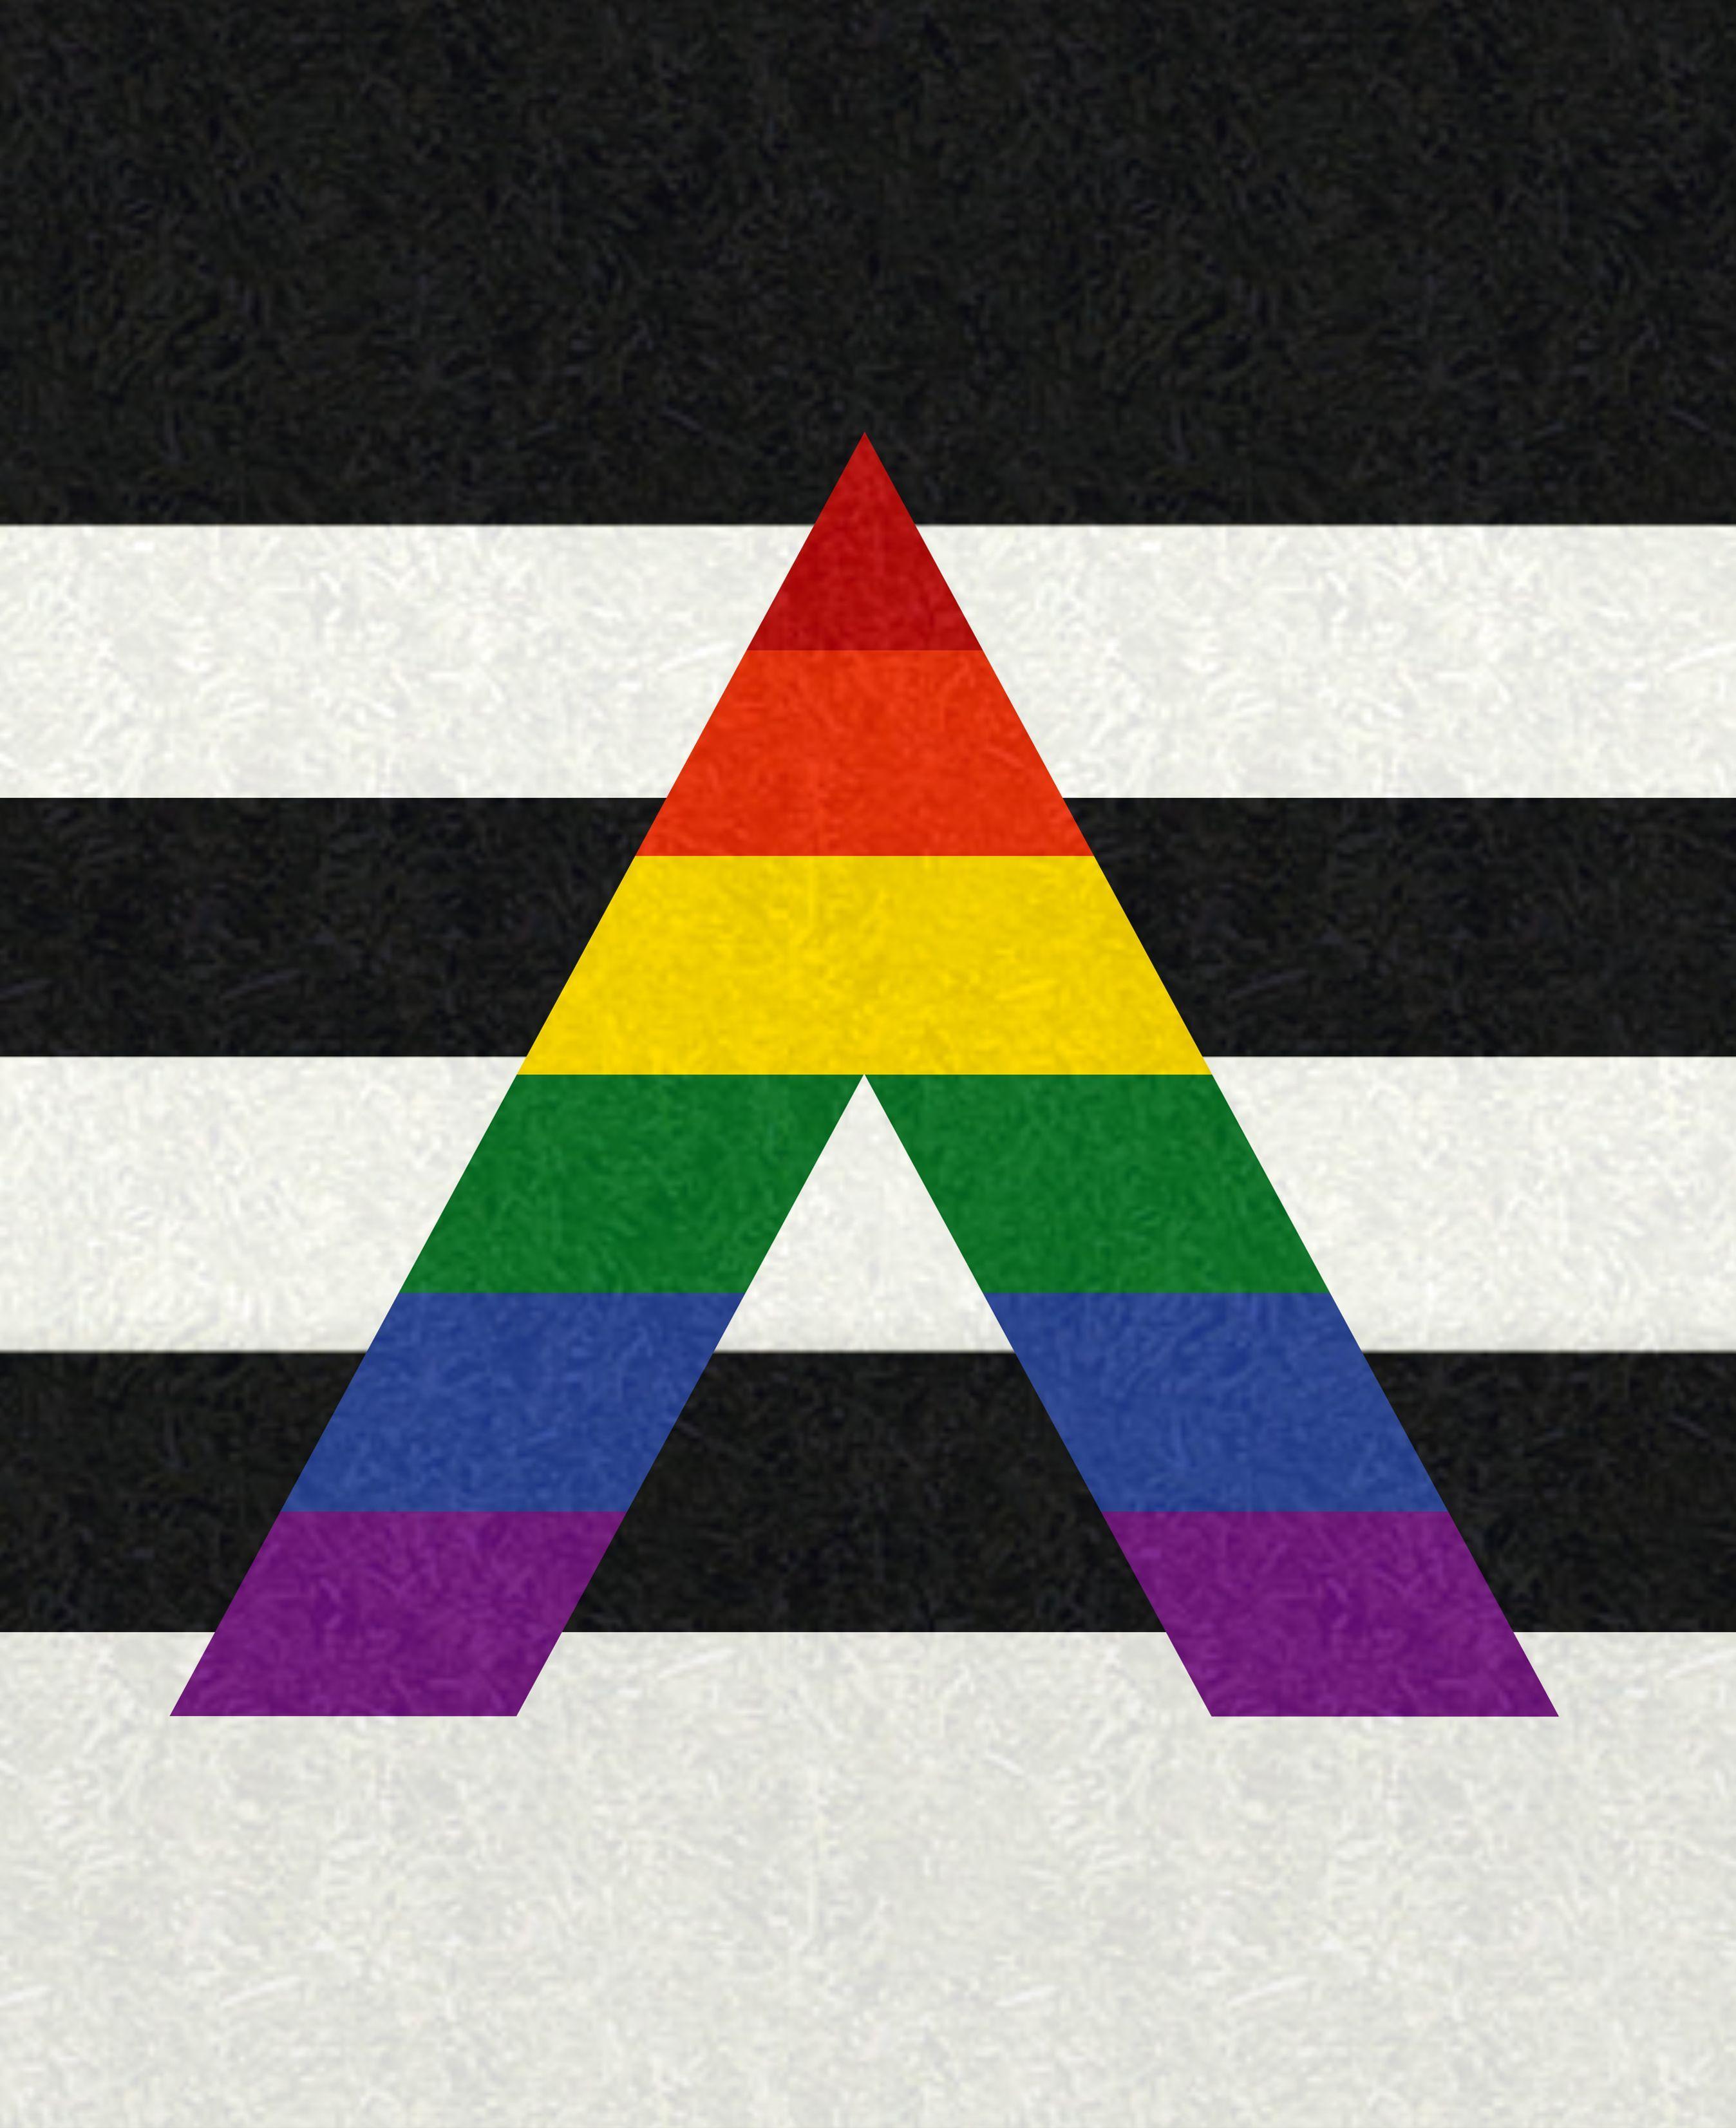 Straight Ally Wallpapers